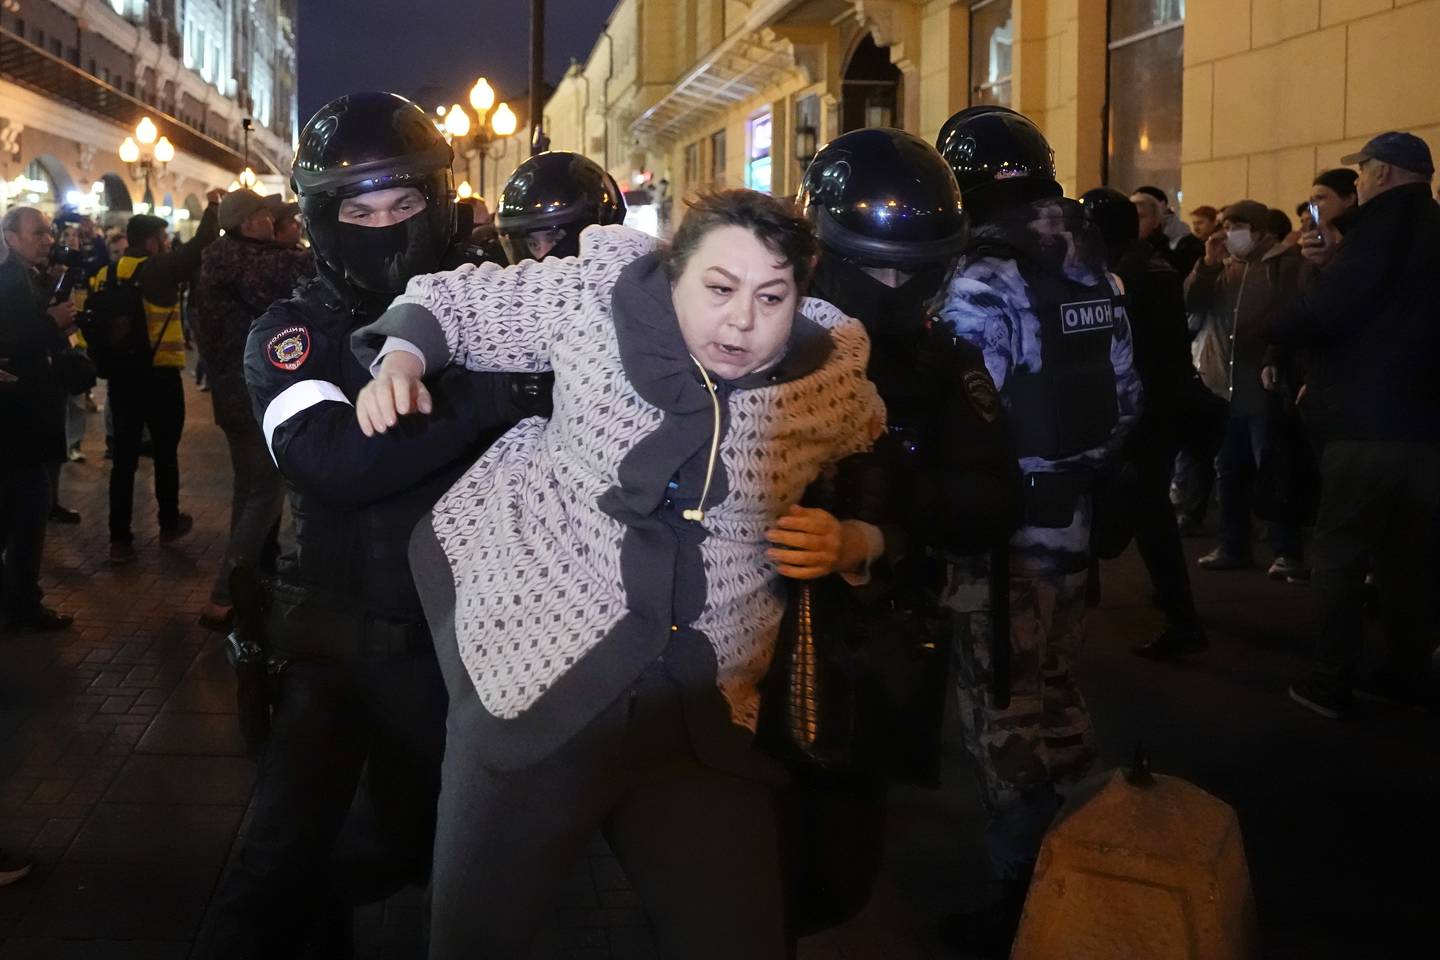 Riot police detain a woman during a protest against mobilization in Moscow, Russia, Wednesday, Sept. 21, 2022. Russian President Vladimir Putin has ordered a partial mobilization of reservists in Russia, effective immediately. (AP Photo/Alexander Zemlianichenko)